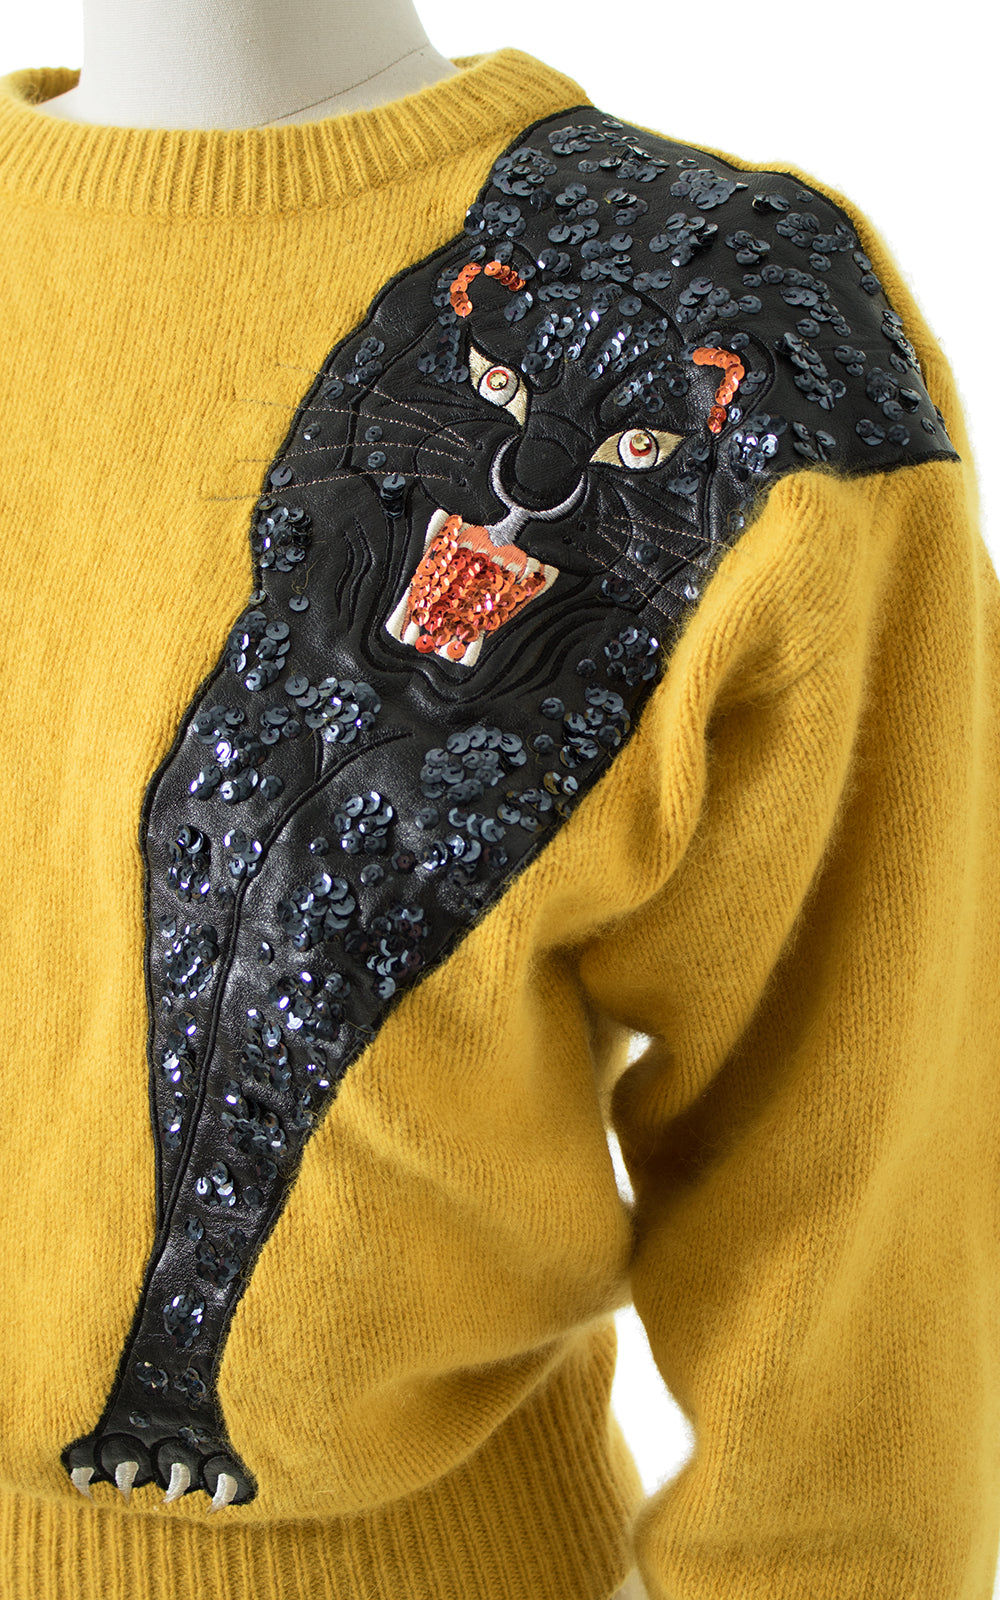 1980s Black Panther Sweater